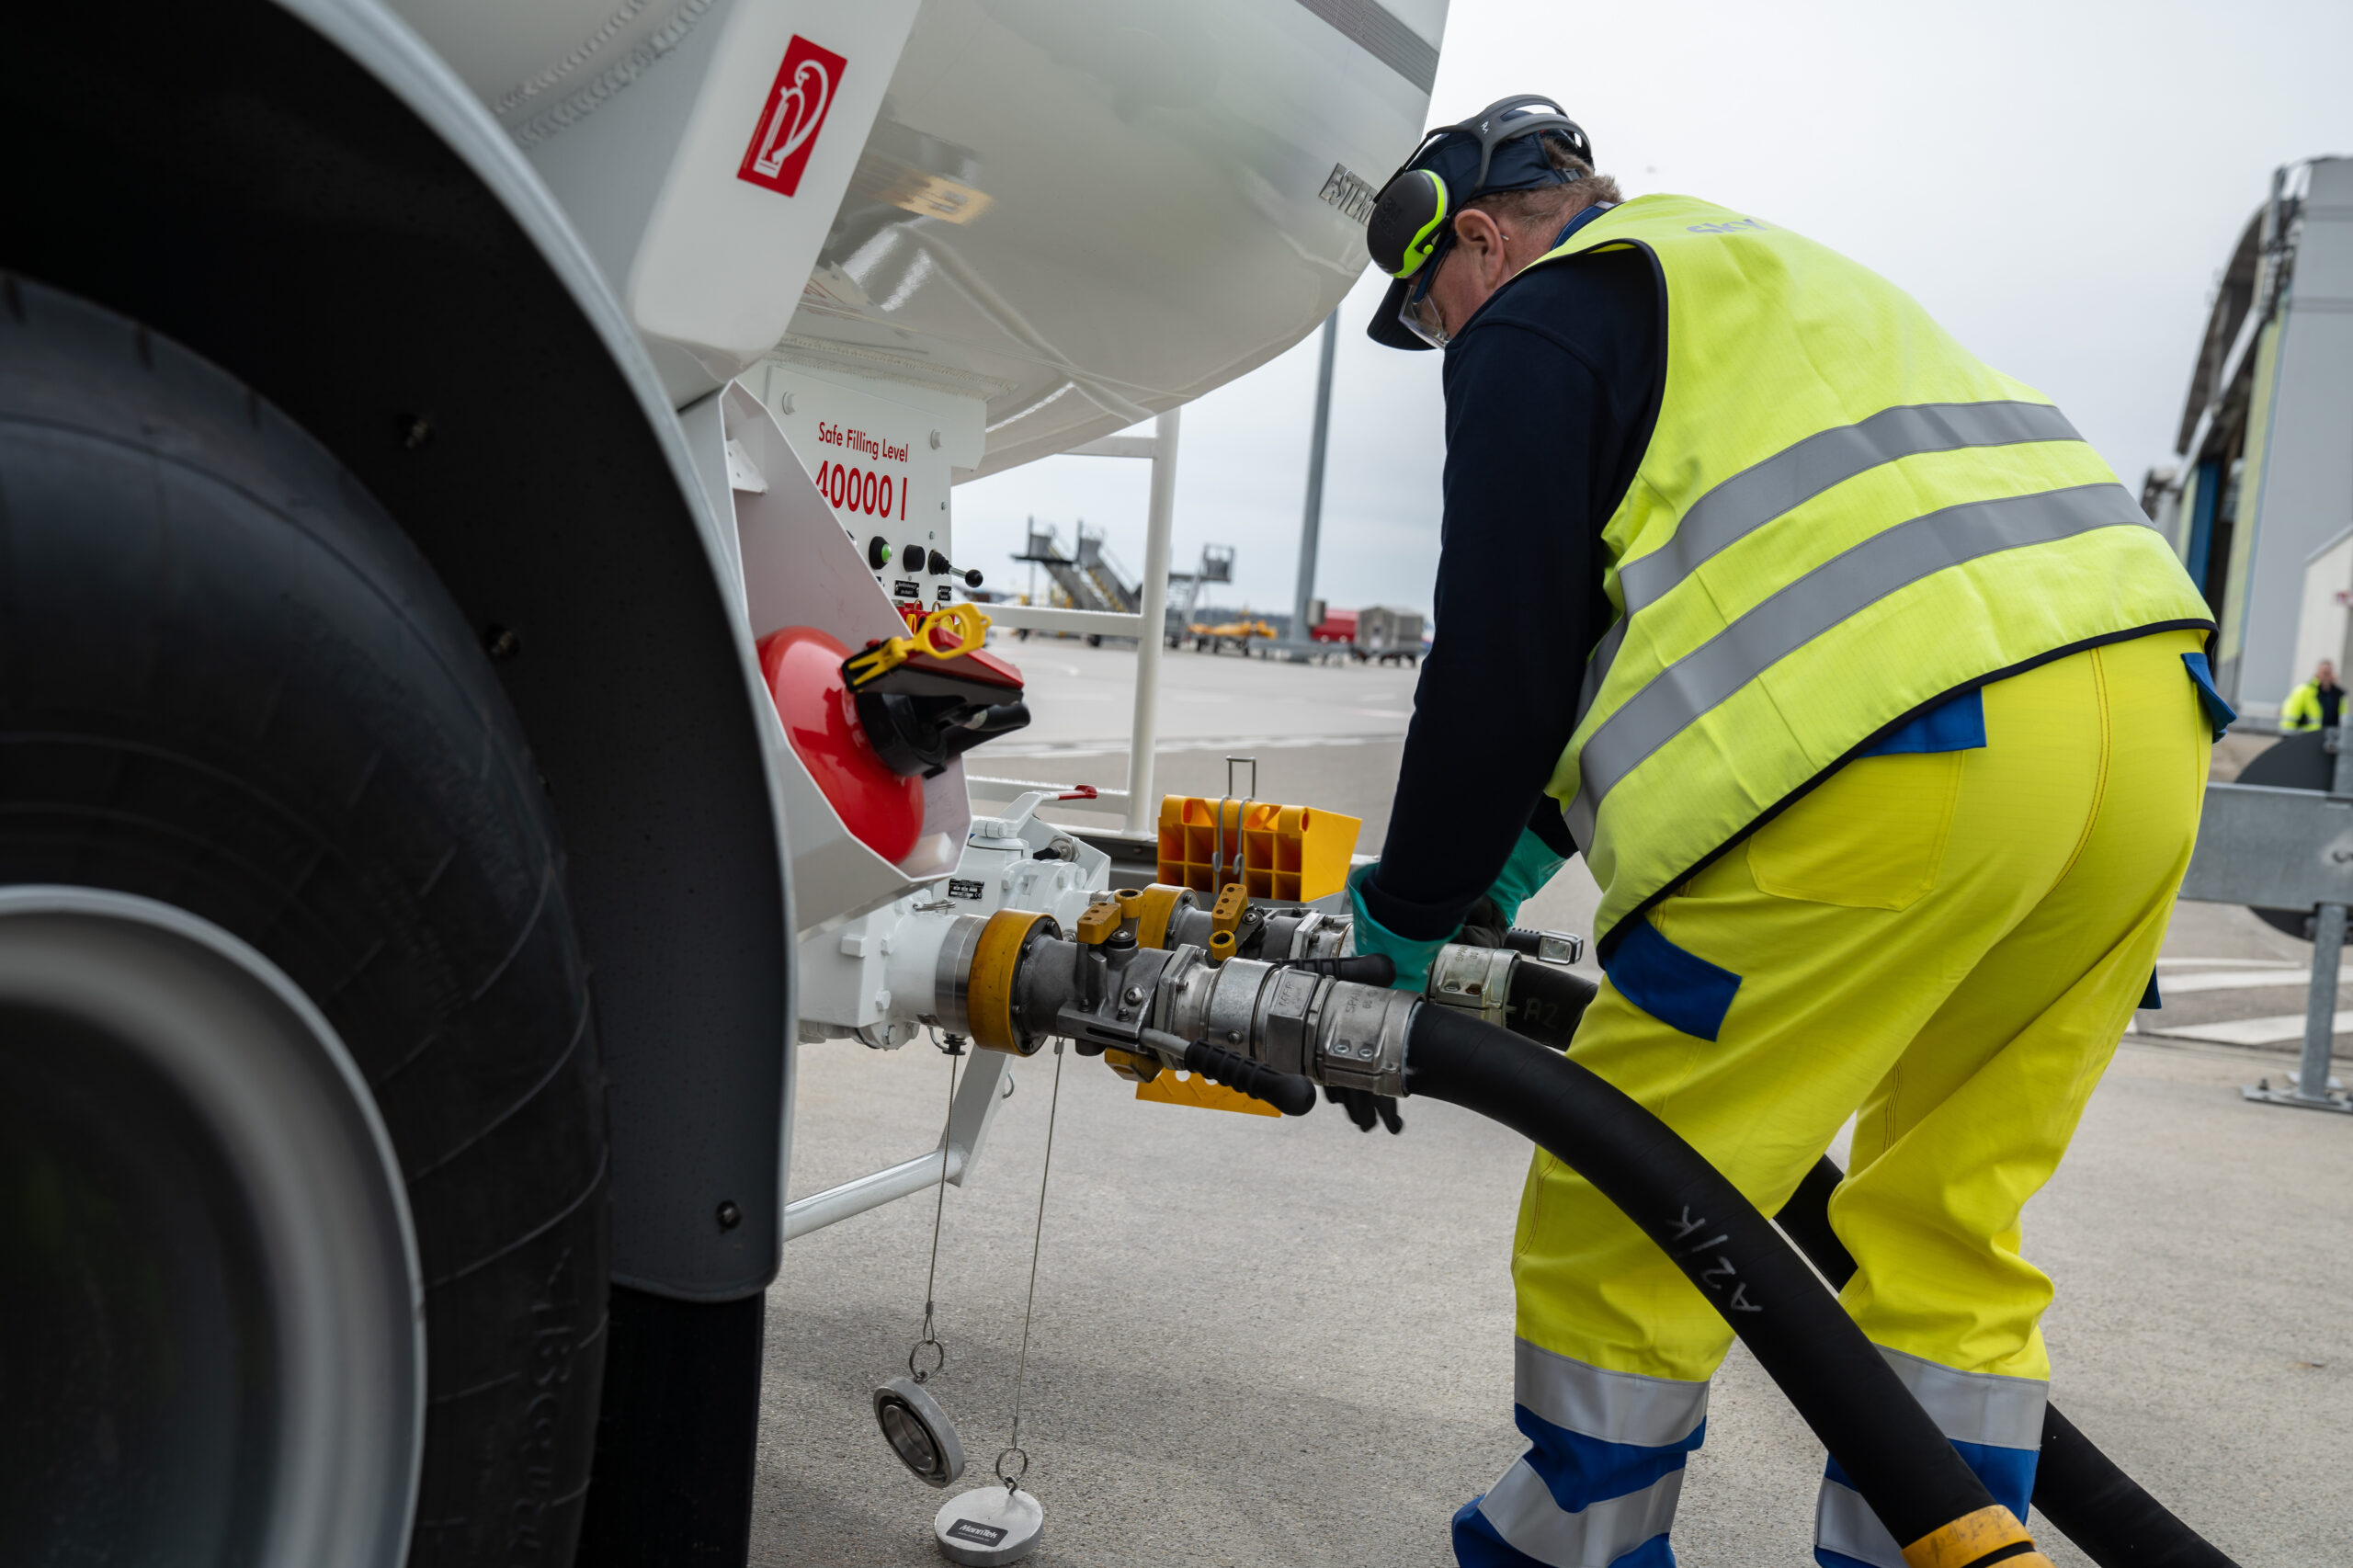 Mr. Müller, who has worked at Skytanking for 12 years, refueling the e-tanker.